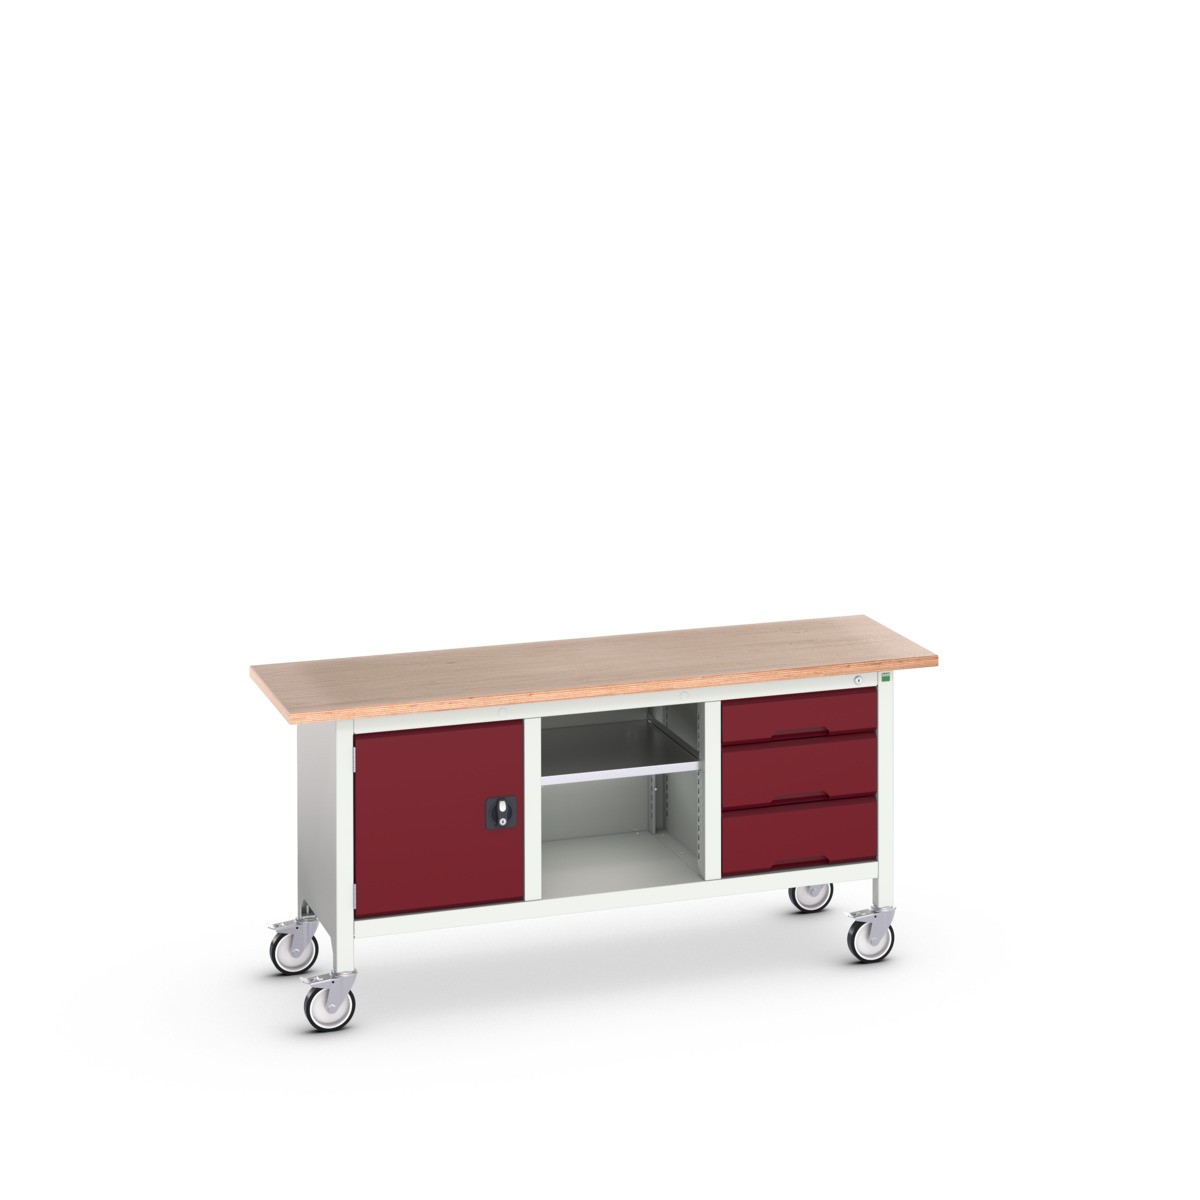 16923220.24 - verso mobile storage bench (mpx)